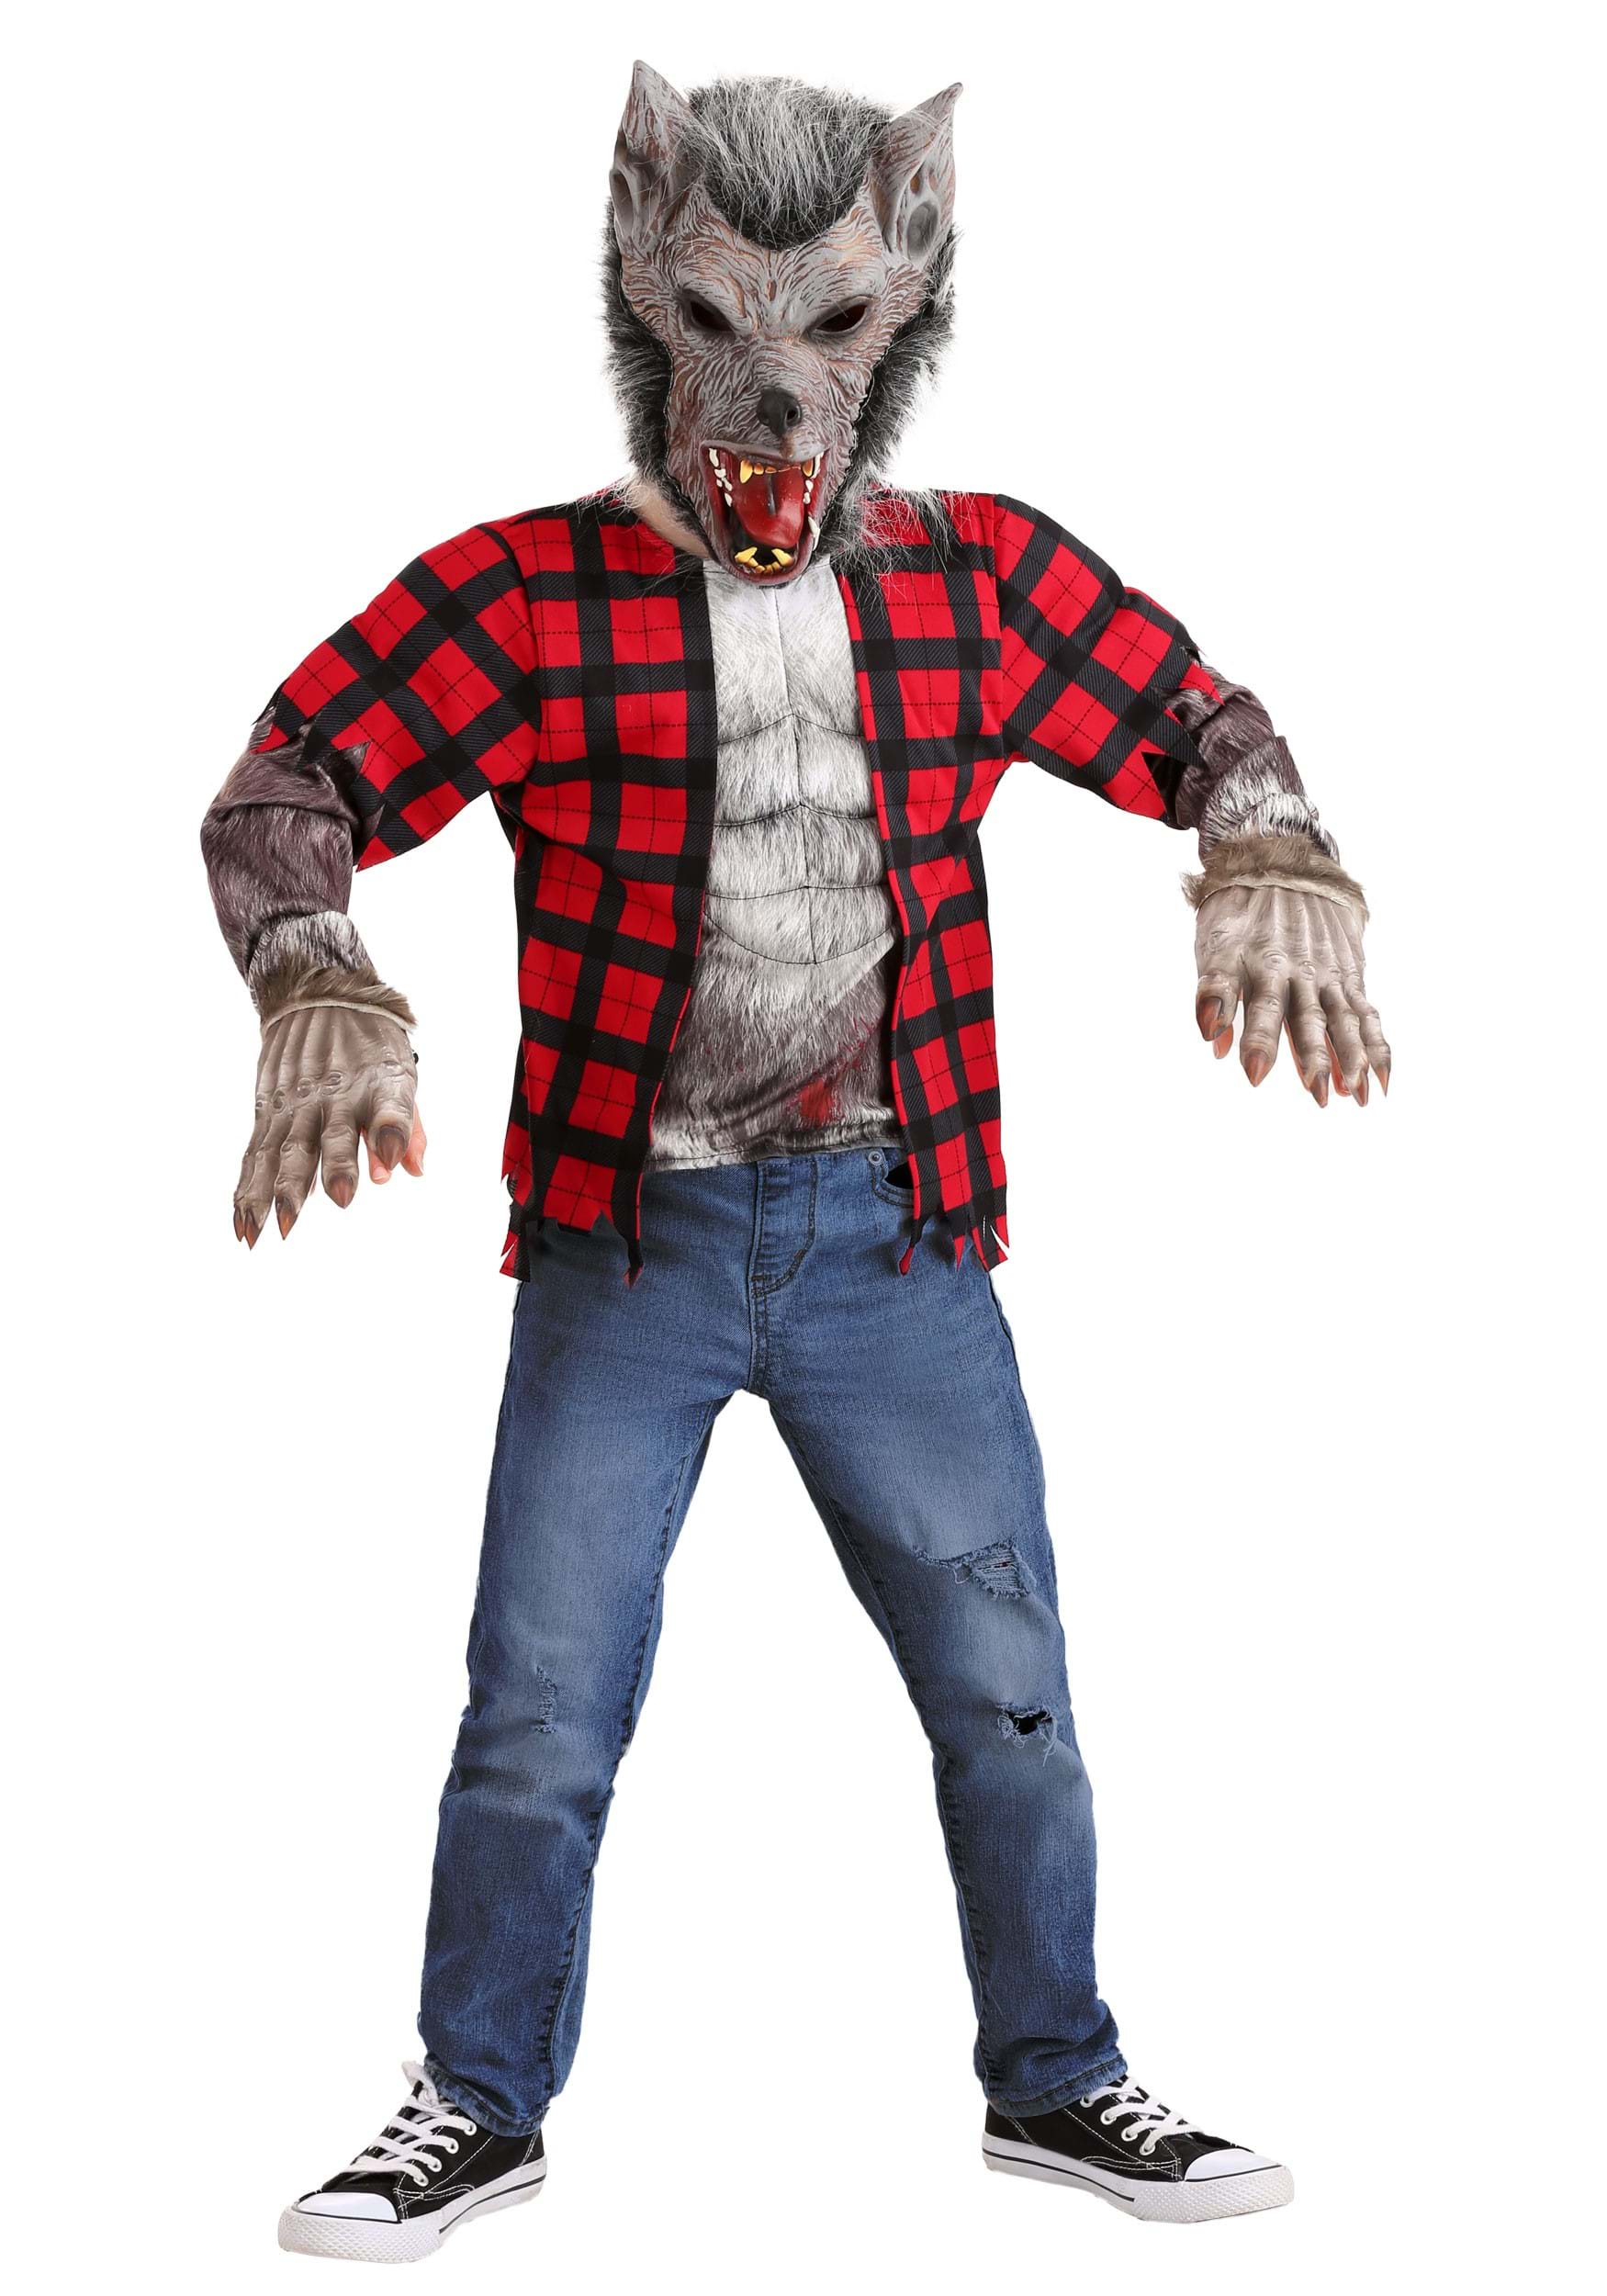 Photos - Fancy Dress FUN Costumes Wily Werewolf Costume for Kids Gray/Red/Brown FUN1700